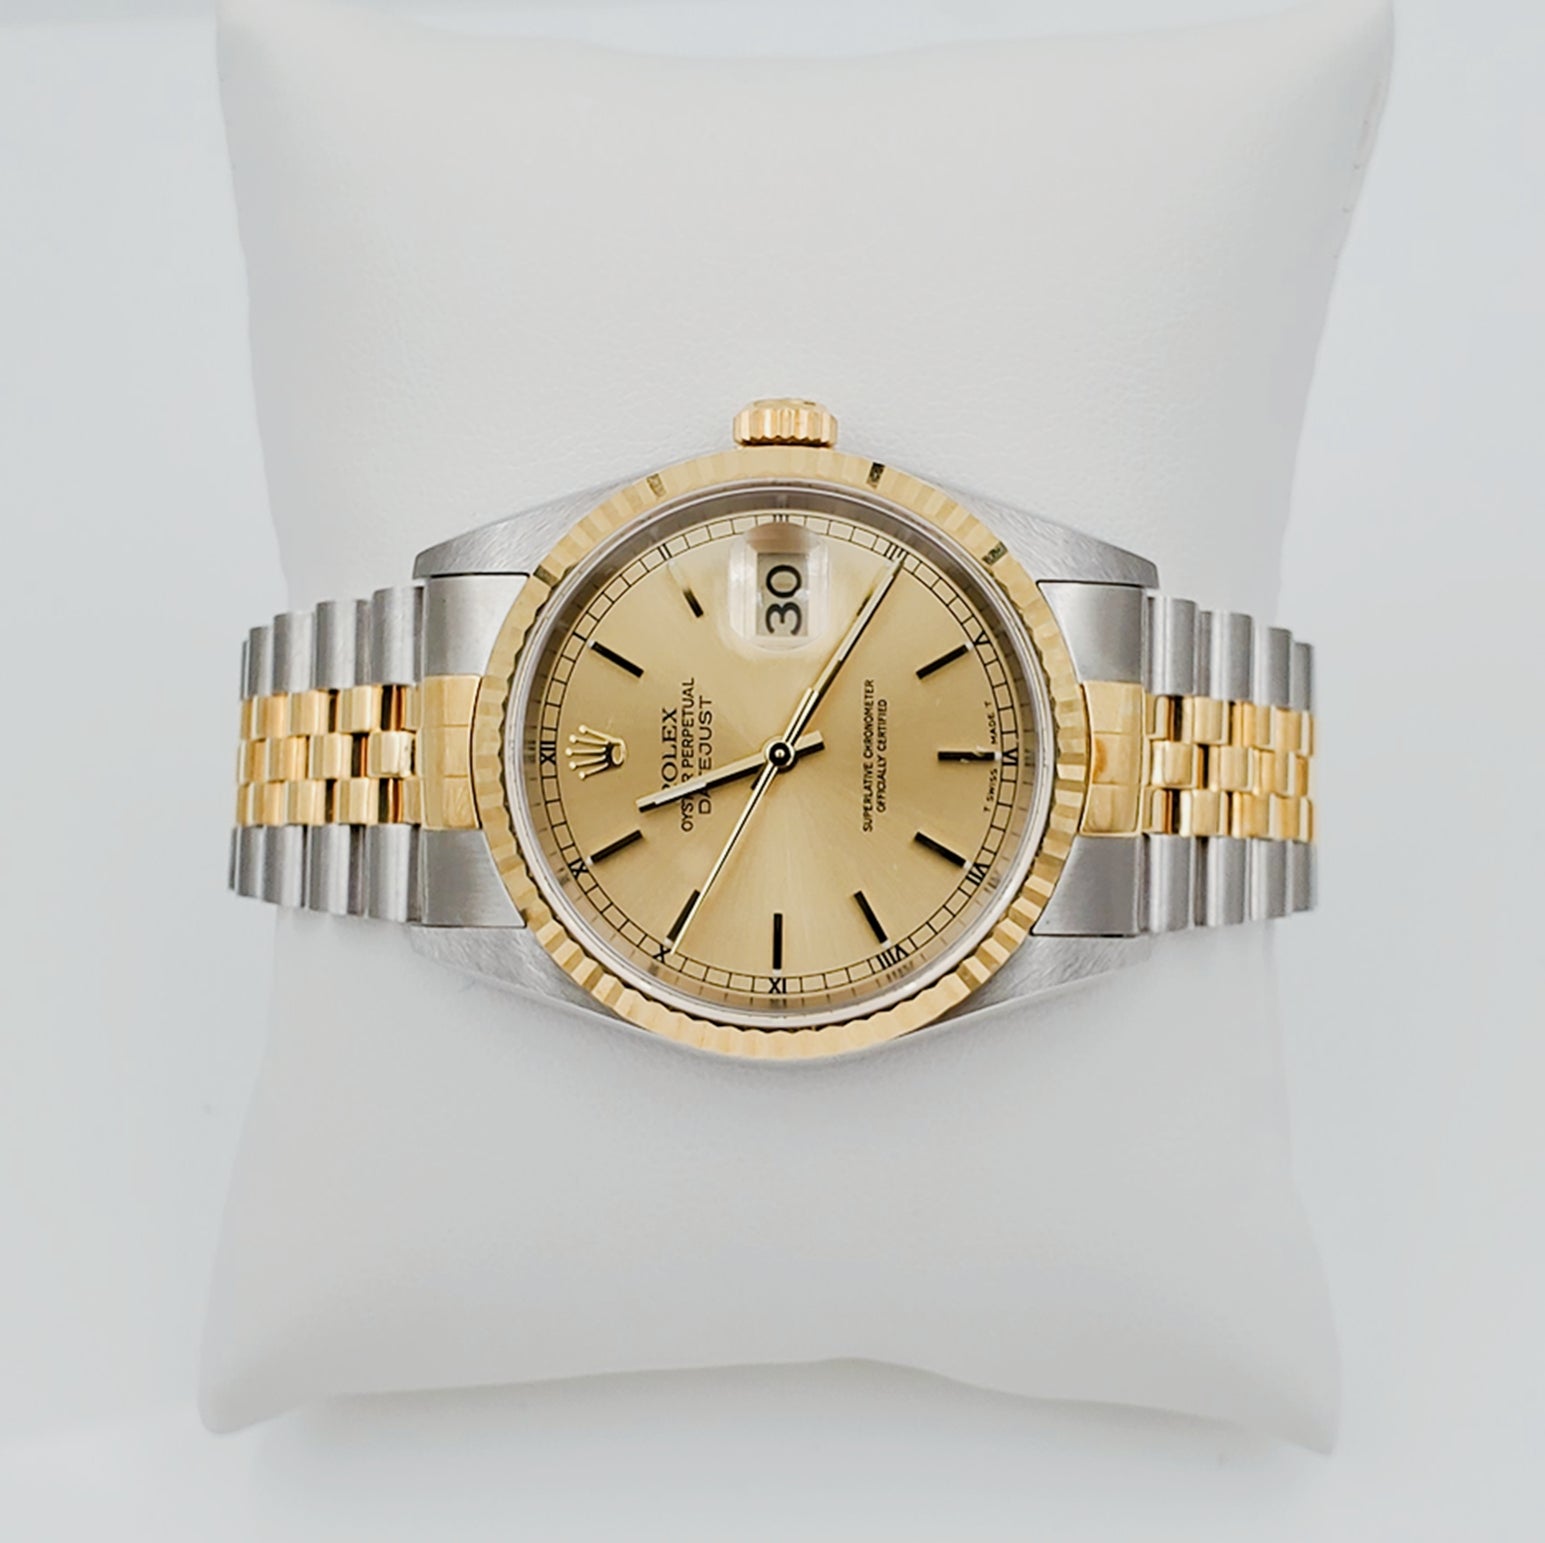 *1998 Men's Rolex 36mm DateJust 18K Gold / Stainless Steel Two Tone Watch with Fluted Bezel and Champaign Dial. (NEW 16233)